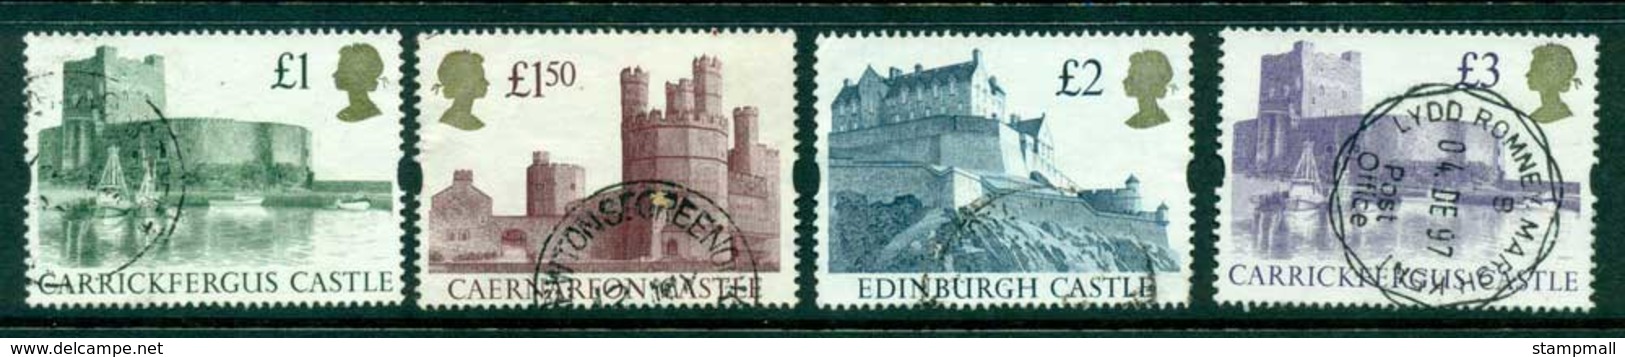 GB 1992-5 £1, 1.5,2 & £3 Syncopated Castles FU Lot26466 - Unclassified